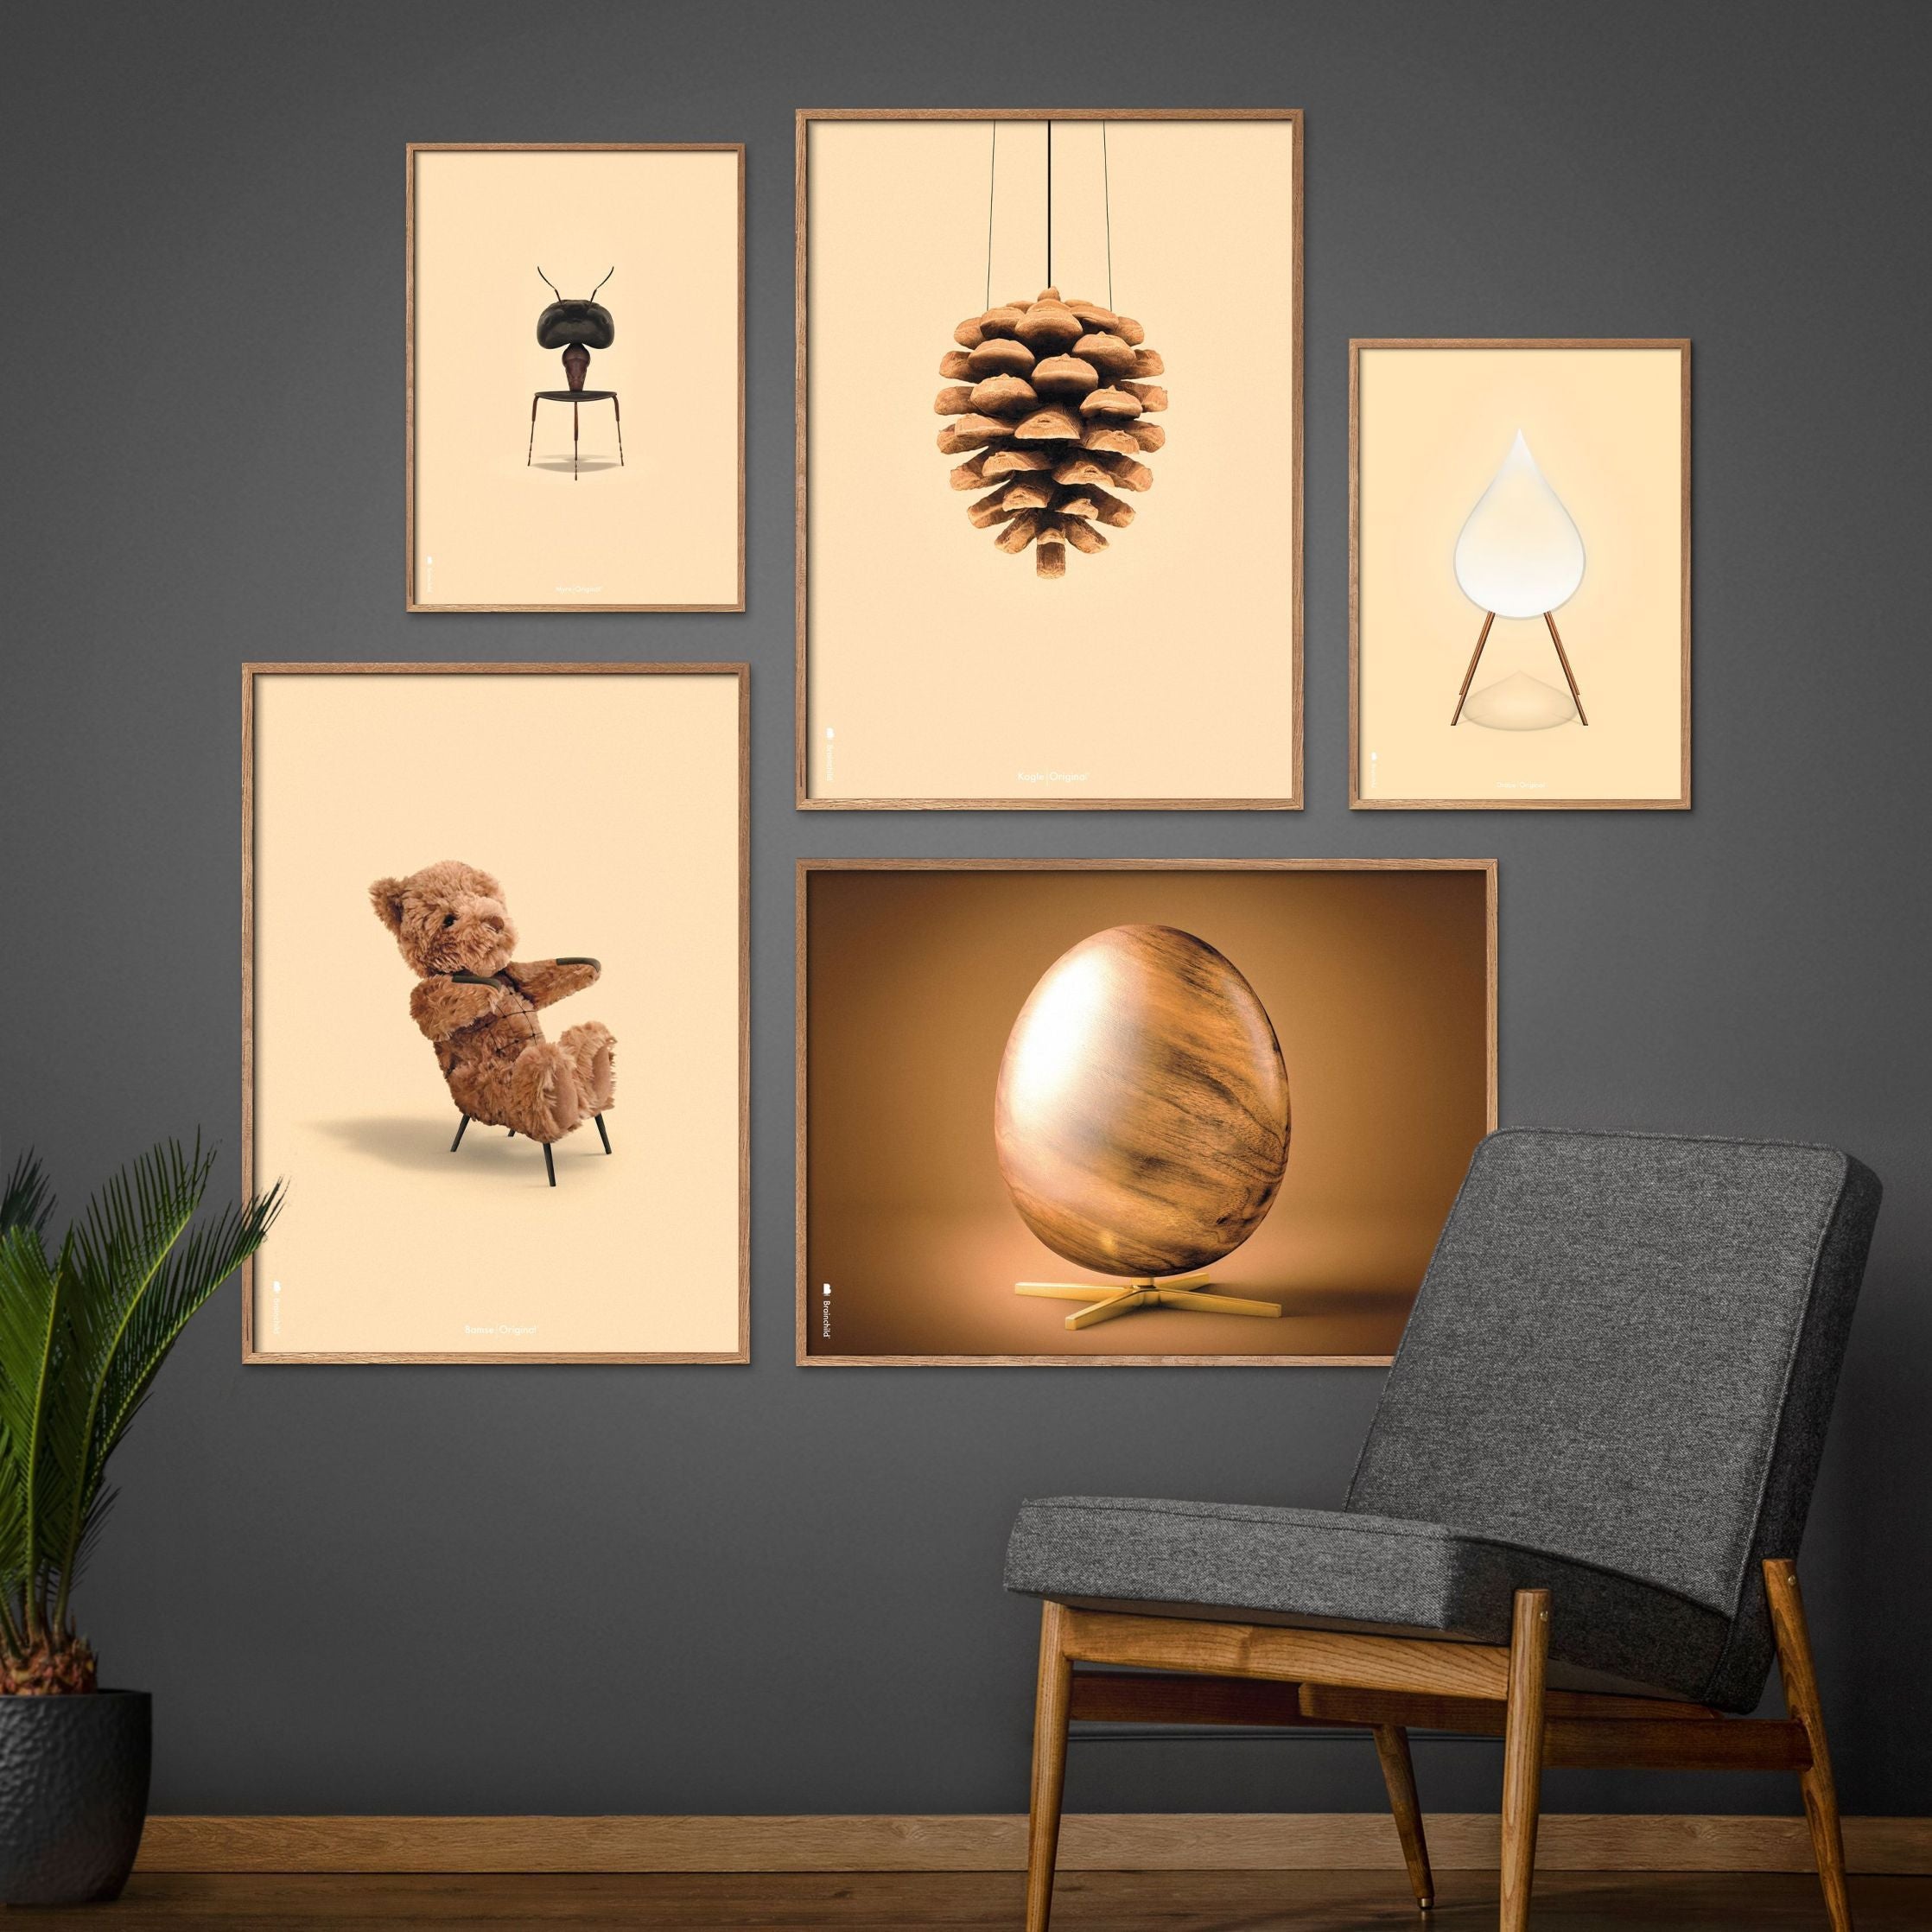 Brainchild Teddy Bear Classic Poster, Frame Made Of Light Wood 50x70 Cm, Sand Colored Background